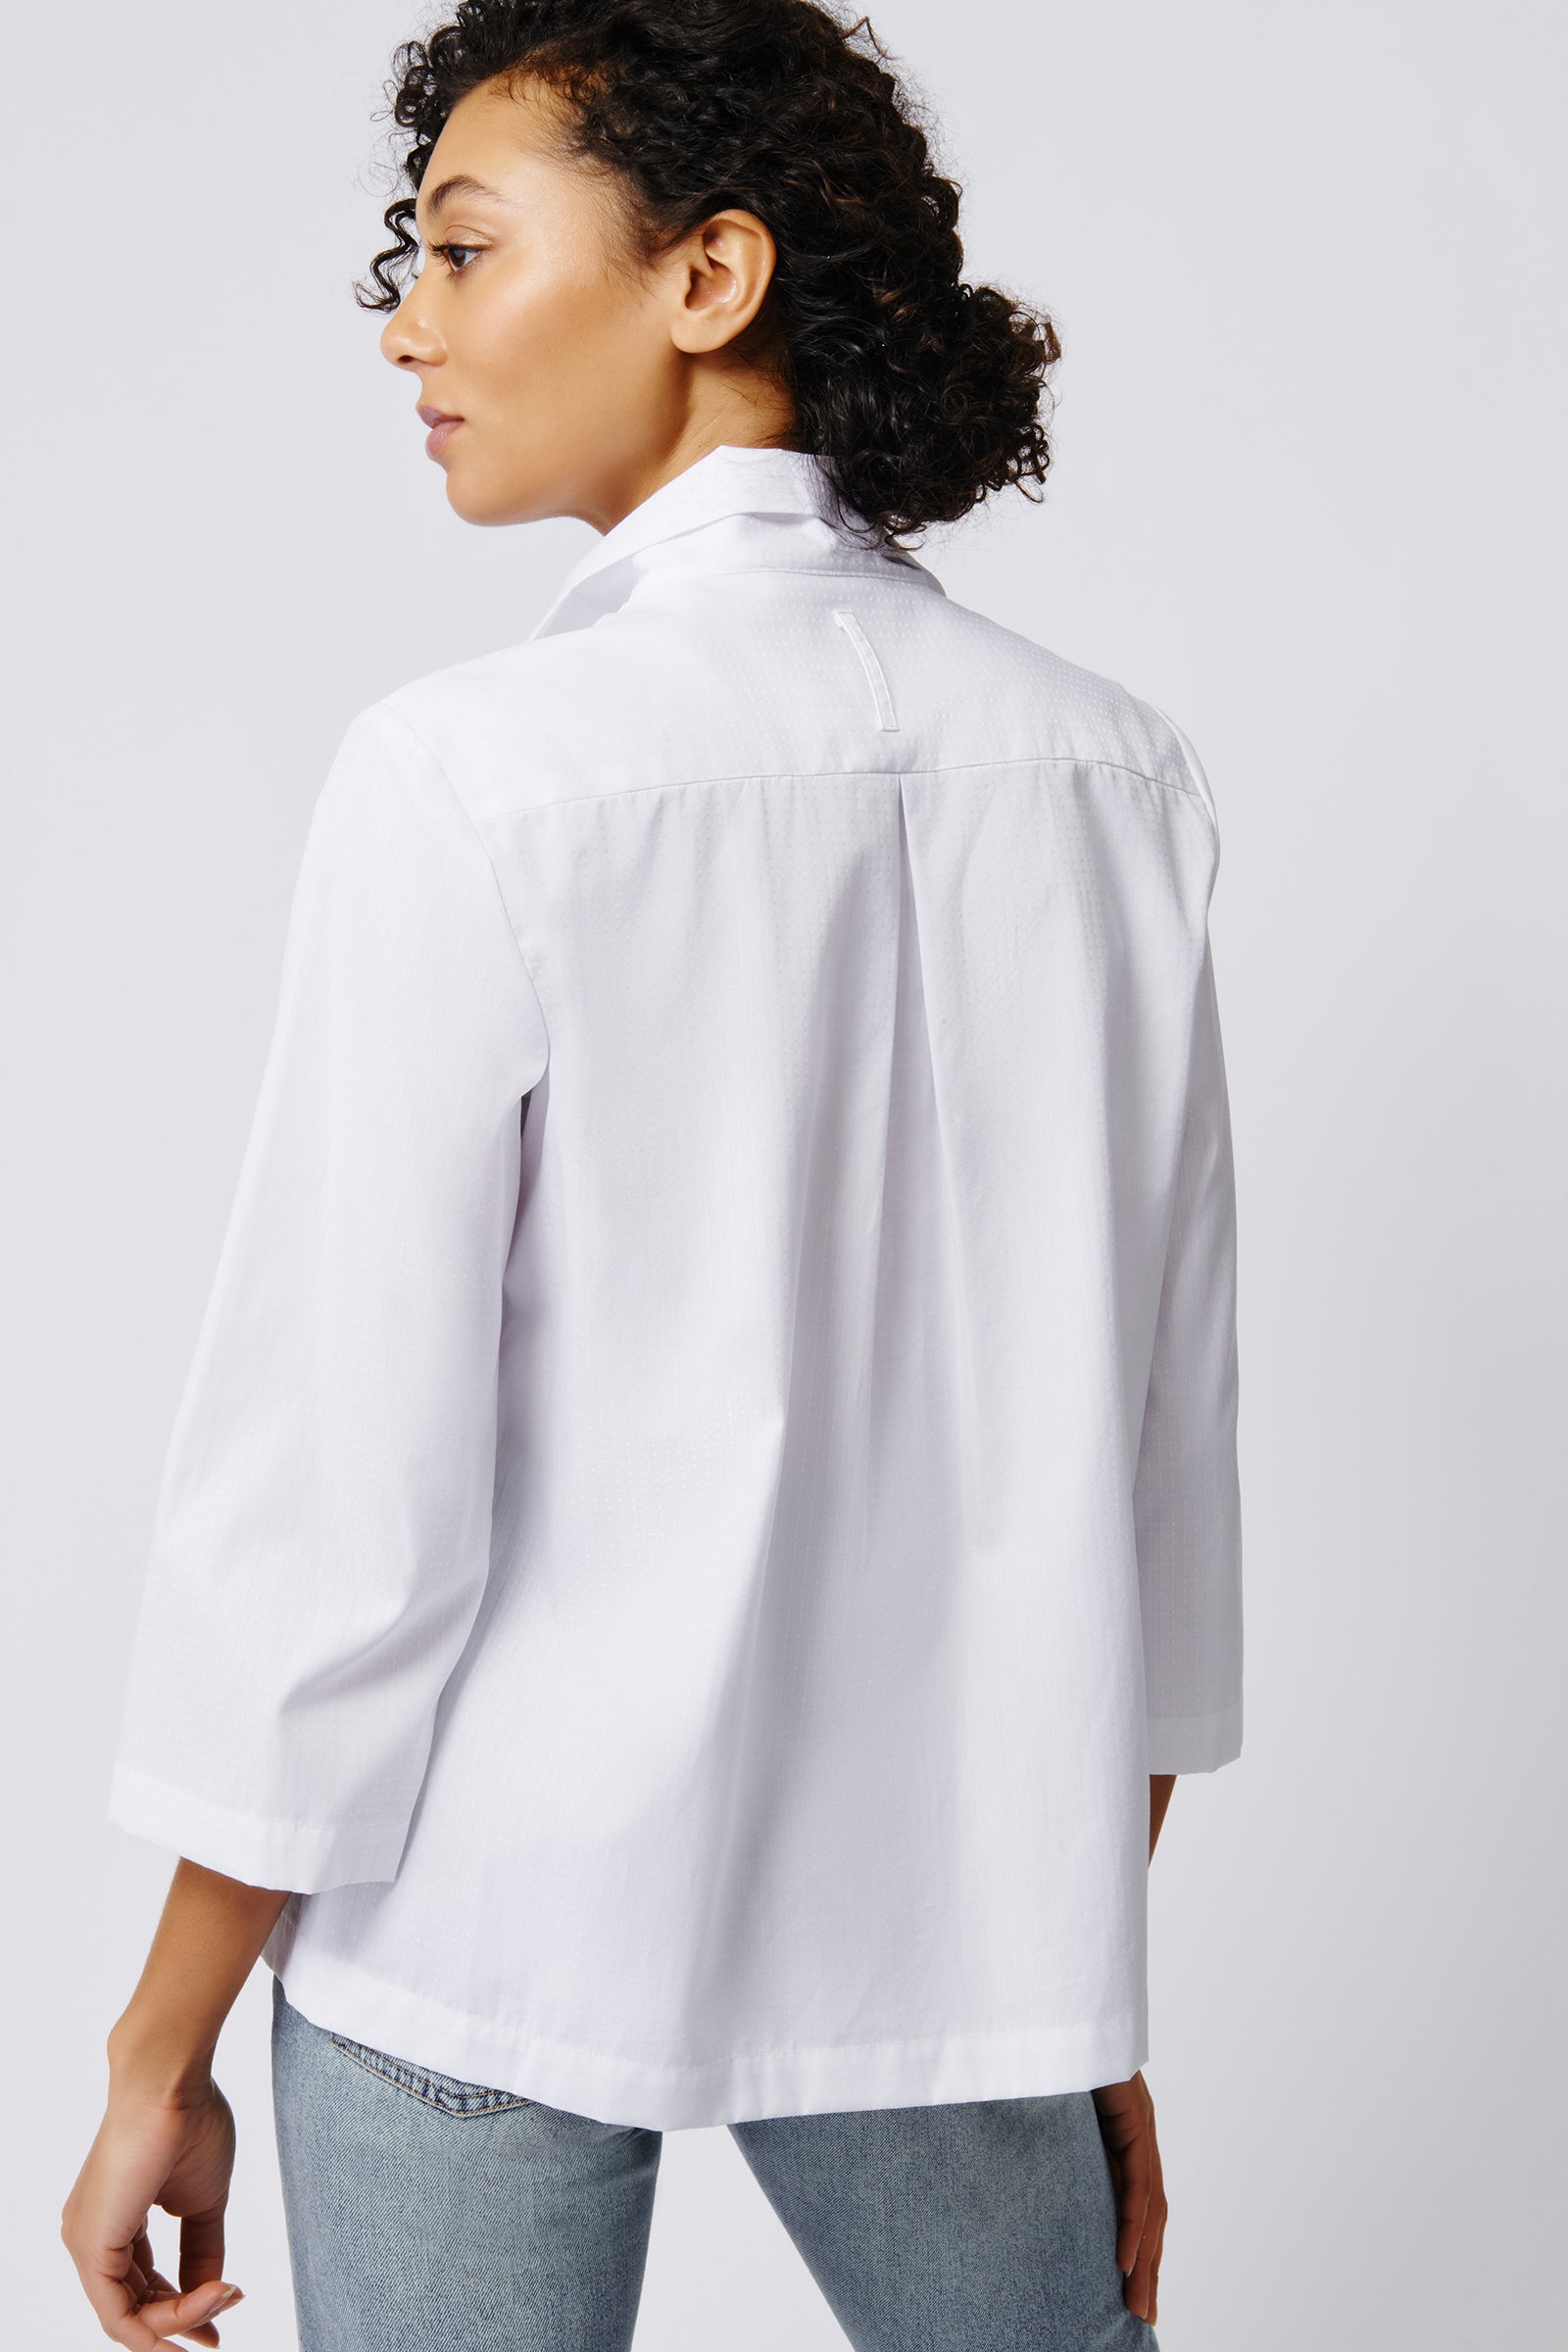 Kal Rieman 3/4 sleeve Ginna shirt in white stretch on model front view hands crossed